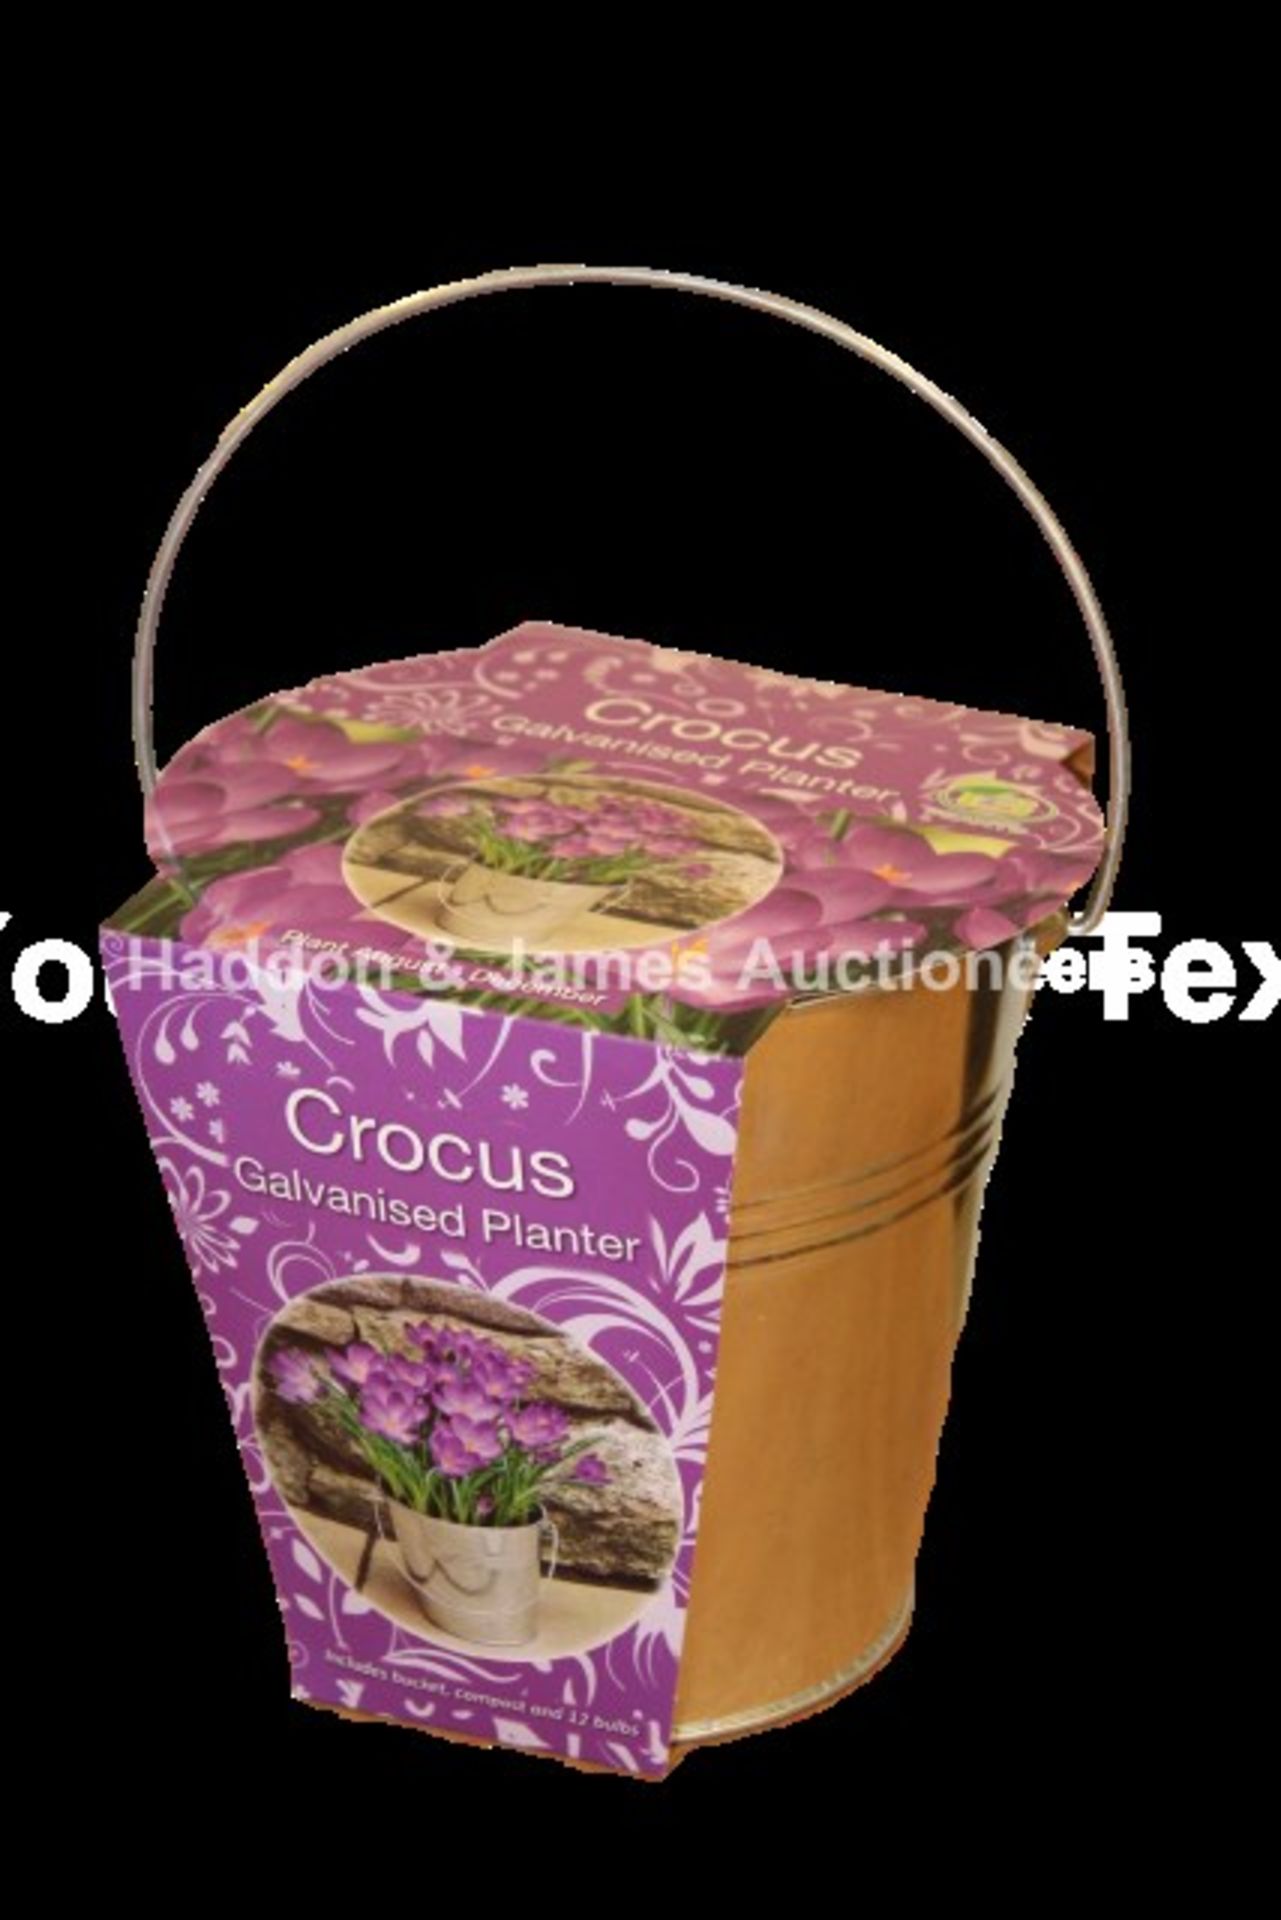 V *TRADE QTY* Brand New Crocus 12 Bulb Galvanised Bucket Gift Set Includes 12 Bulbs, Bucket - Image 2 of 2